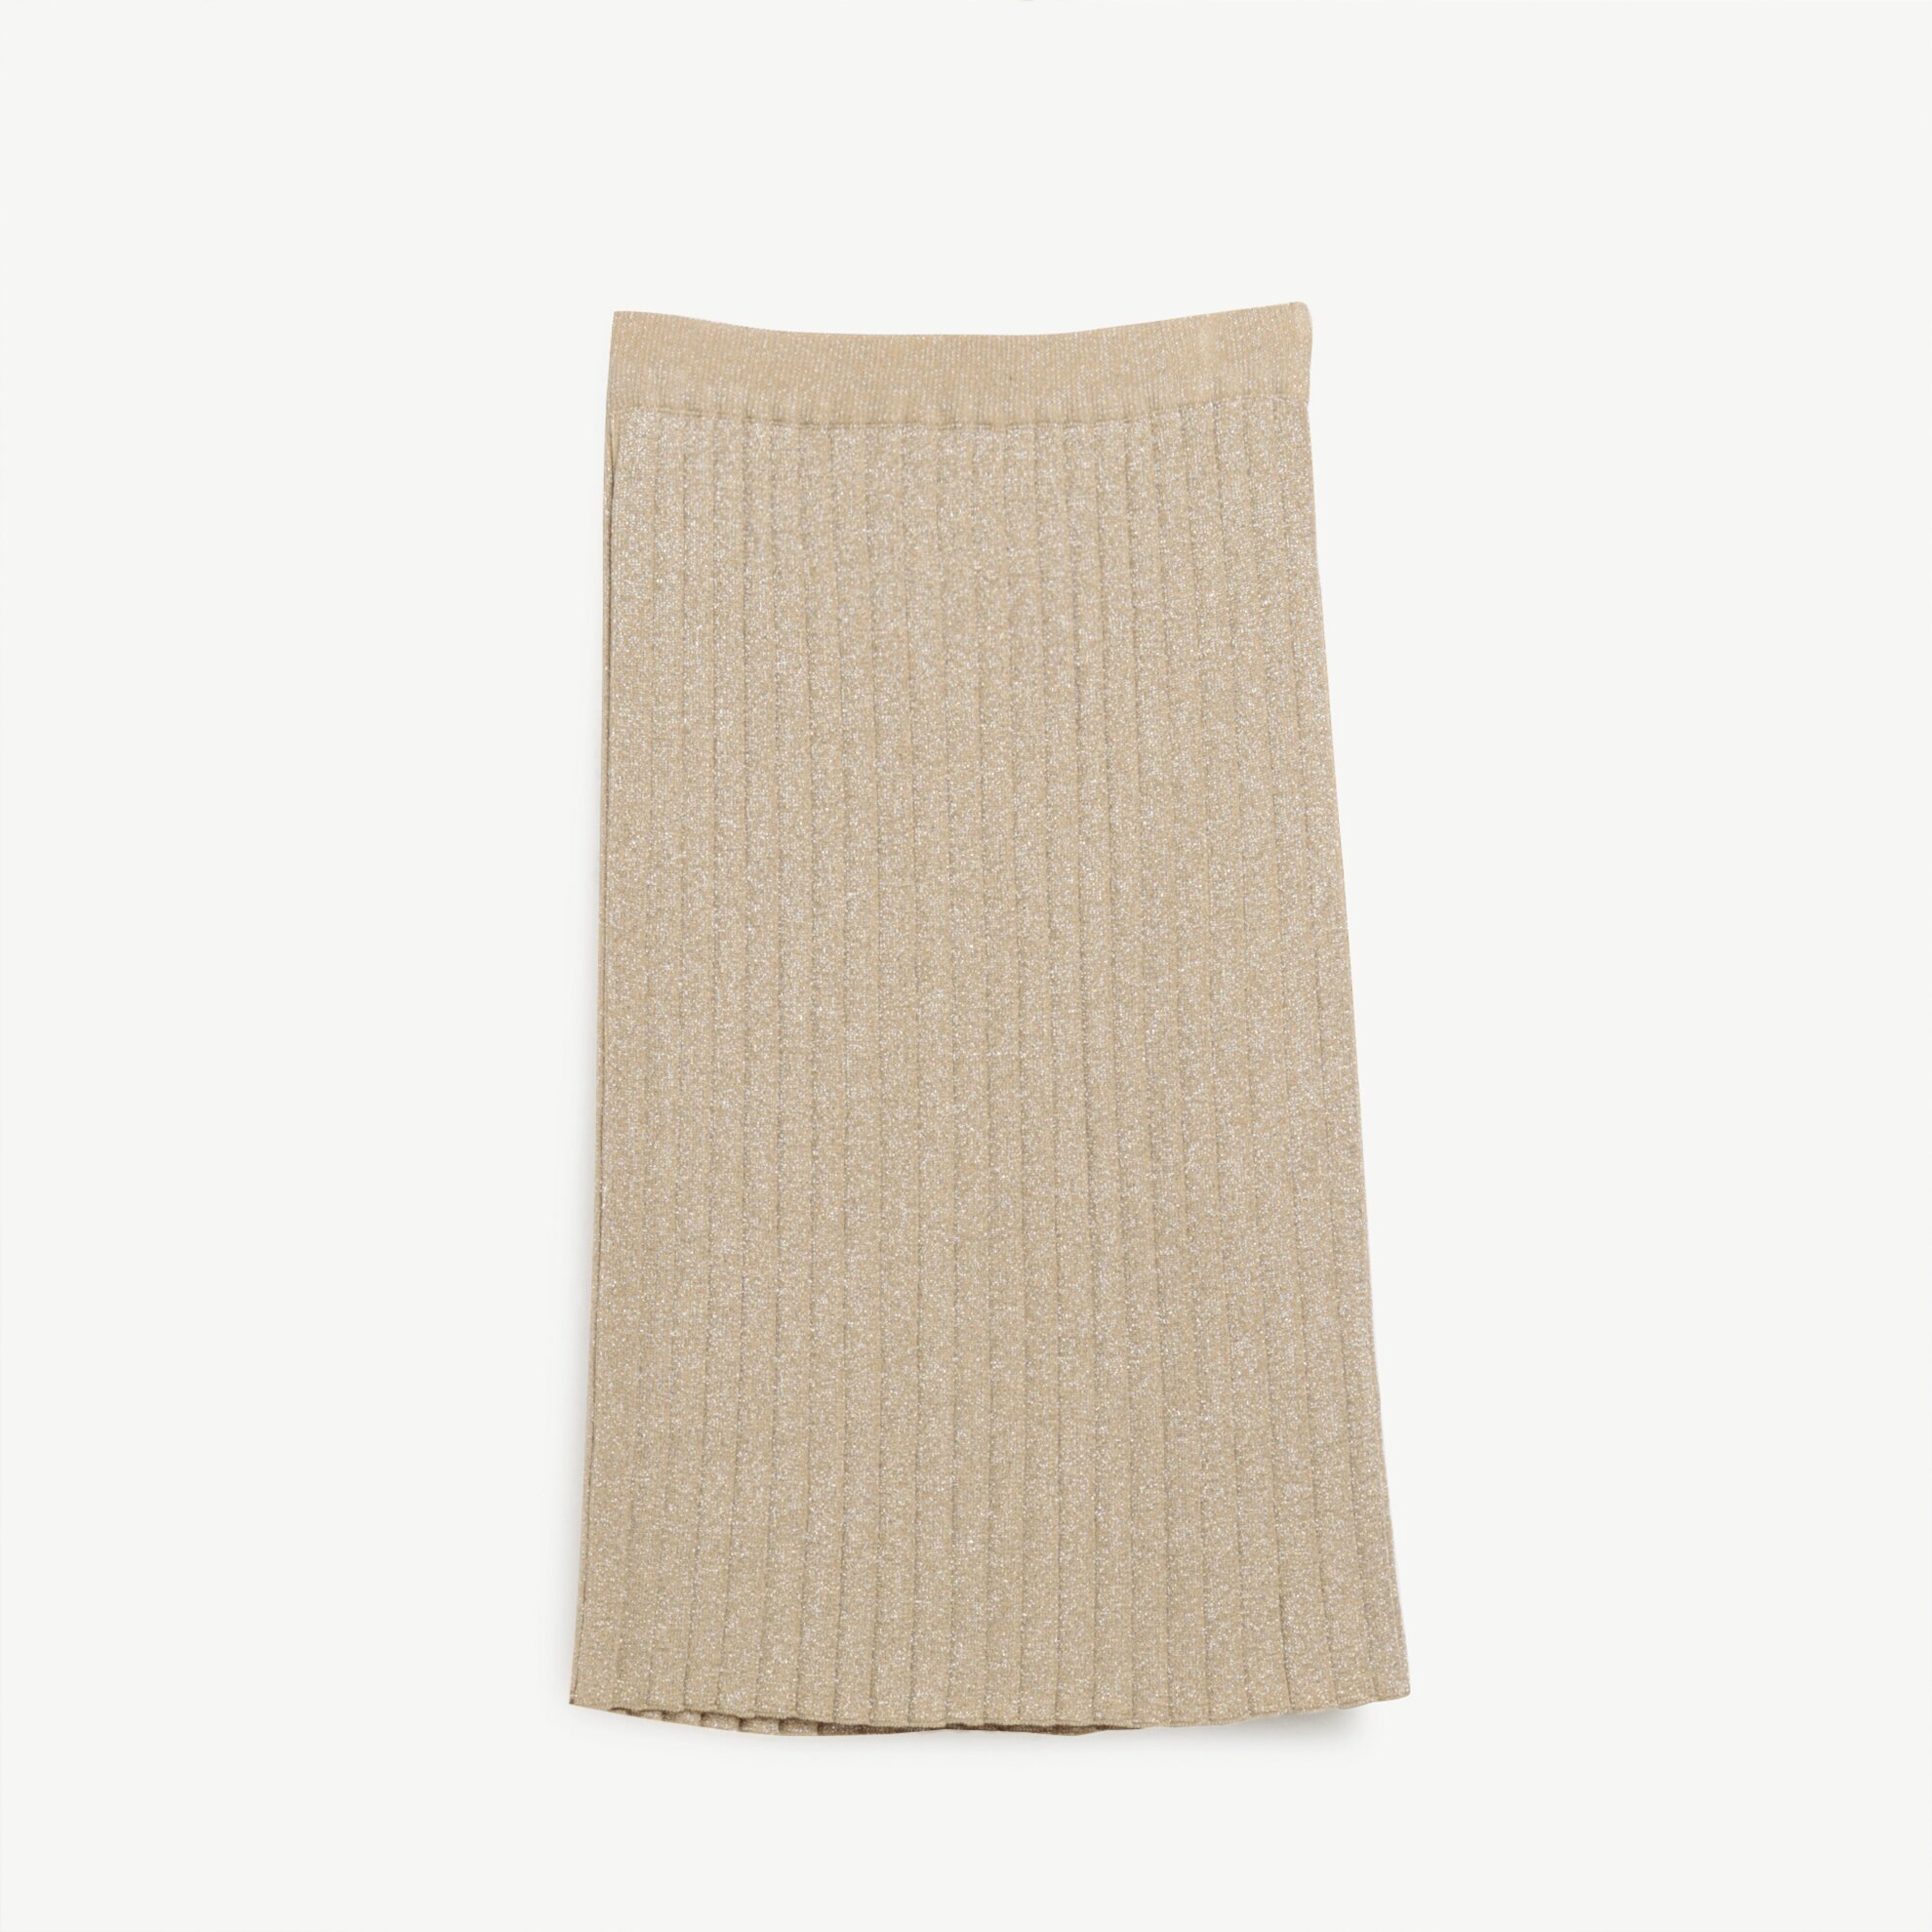 Pleated Knitted Skirt